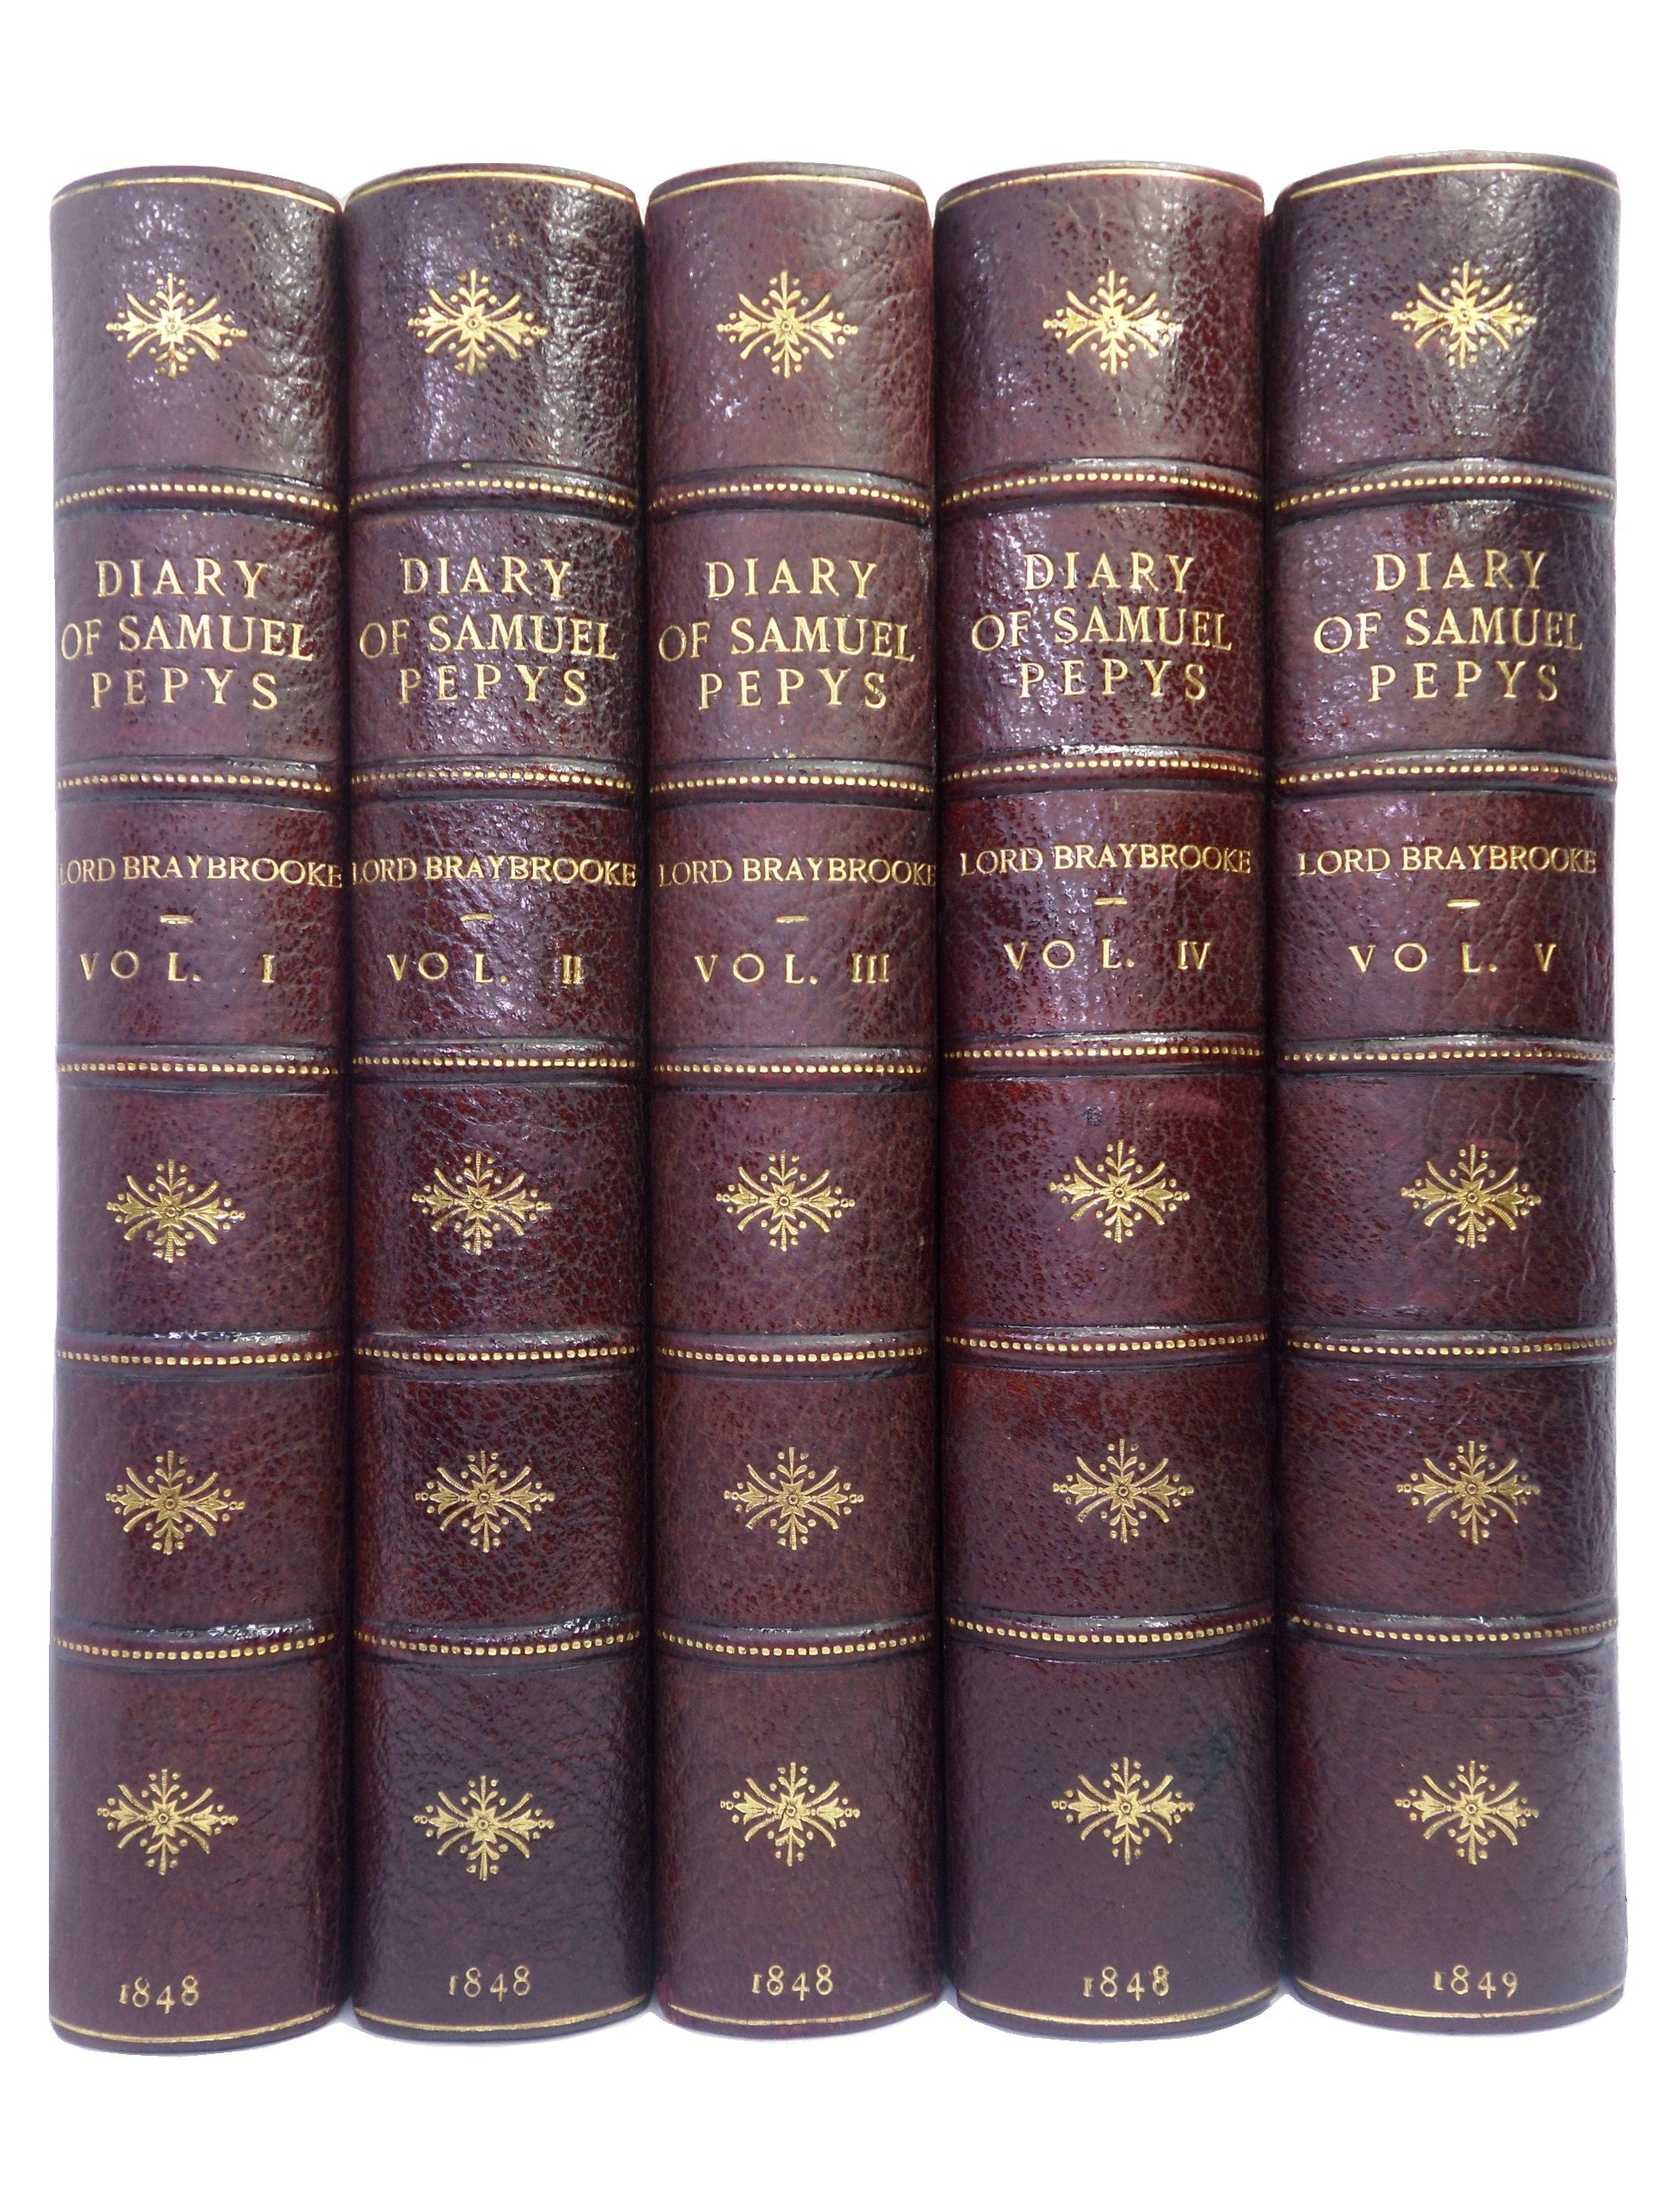 THE DIARY OF SAMUEL PEPYS 1848-49 LEATHER BOUND IN FIVE VOLUMES